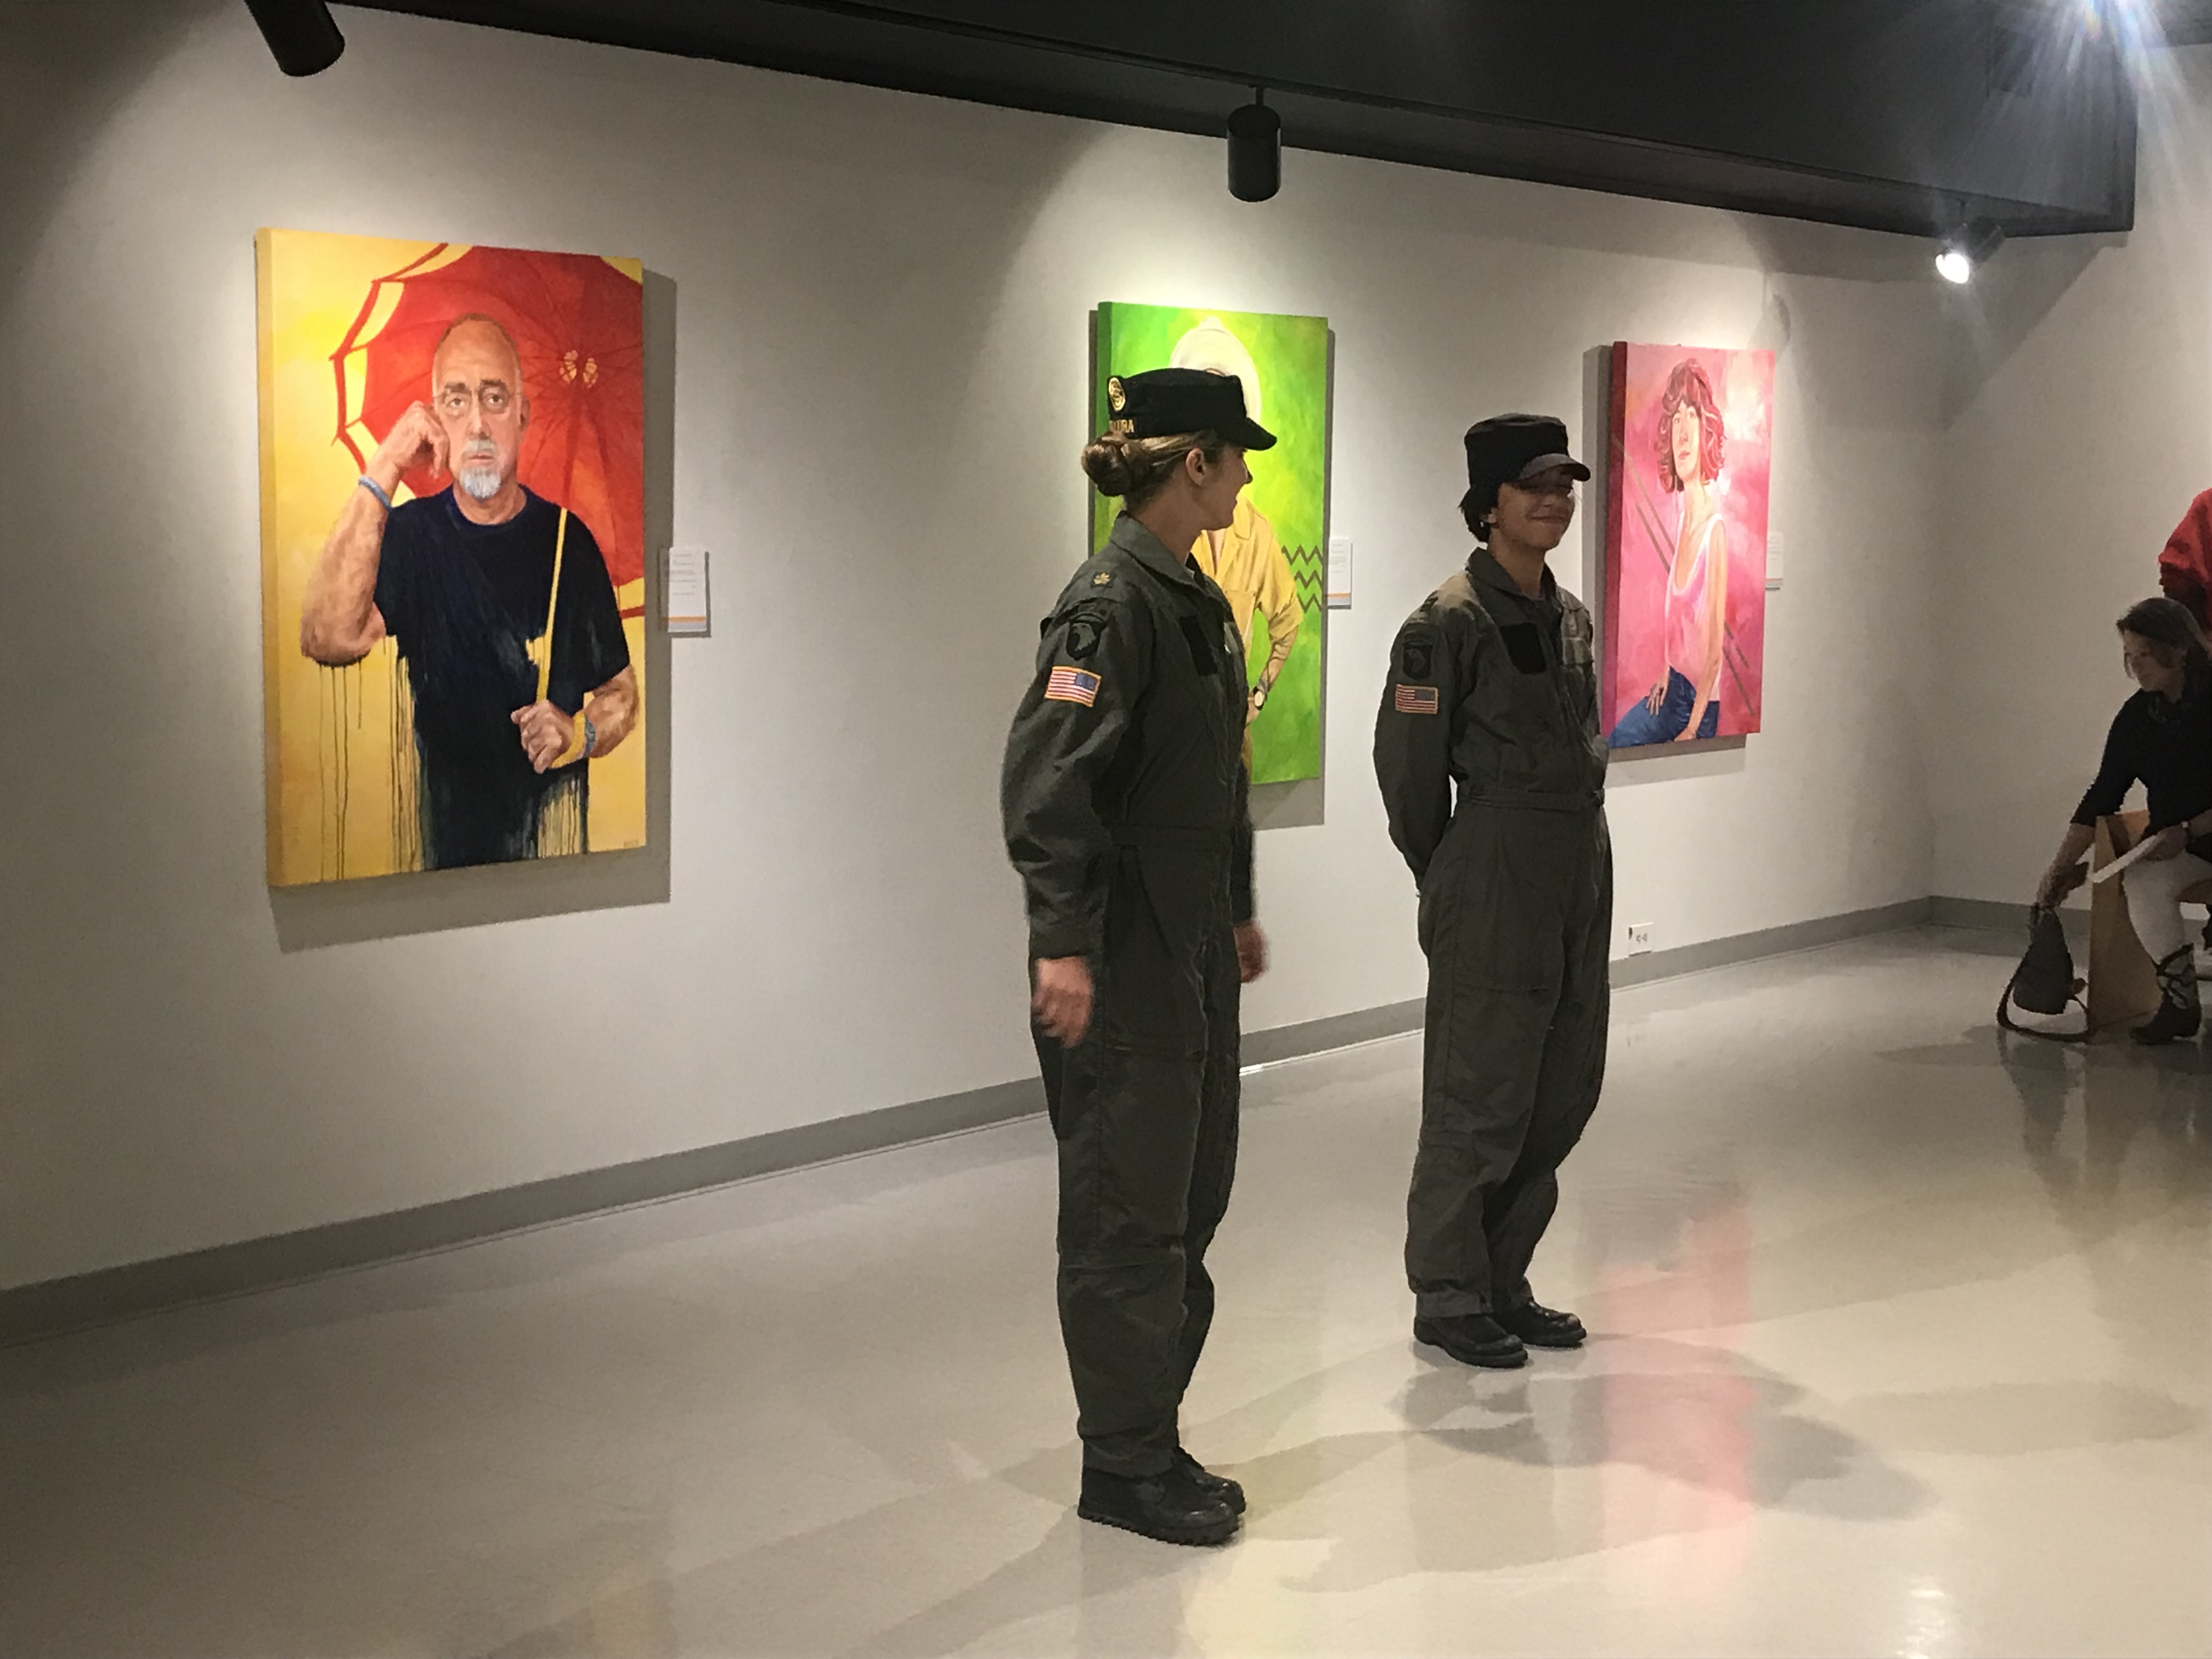 Two women in army dress standing in front of three colorful portraits. The portrait on the left of a man with a white bear holding a red parasol against a yellow background, the middle portrait is partially hidden behind the two women, and the far right portrait is of a person with red hair in front of a pink background. 